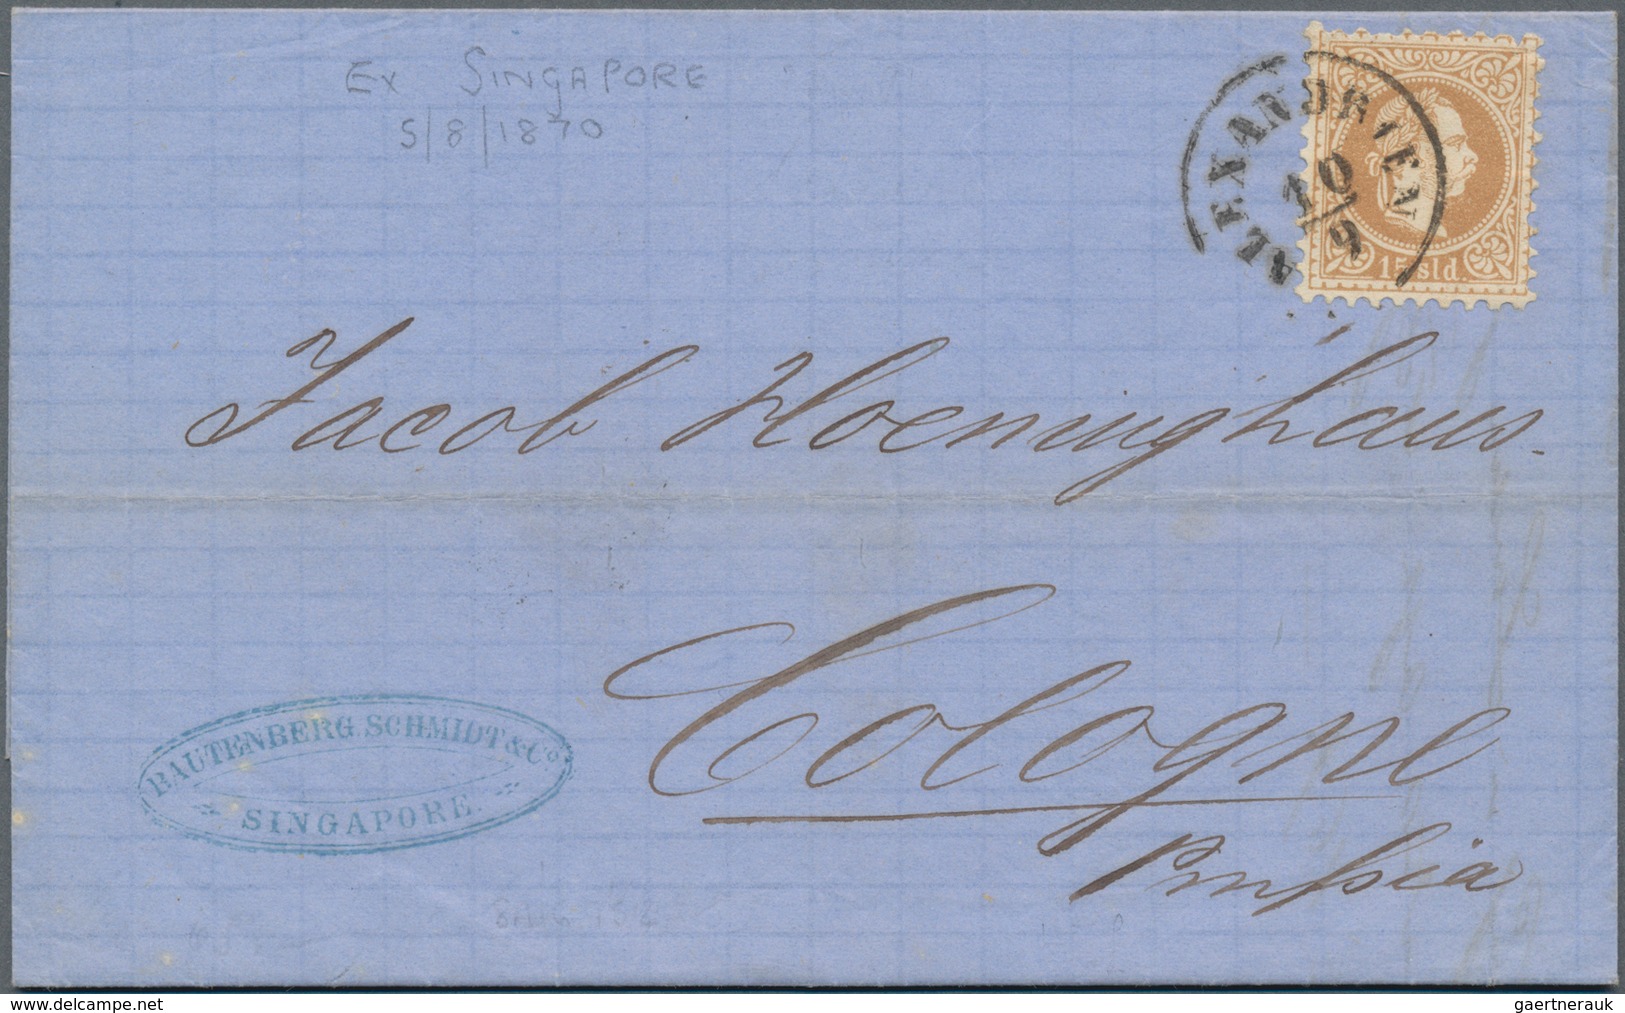 Singapur: 1870 Folded Letter From Singapore To Cologne, Germany Via Alexandria, Dated Inside 'Singap - Singapore (...-1959)